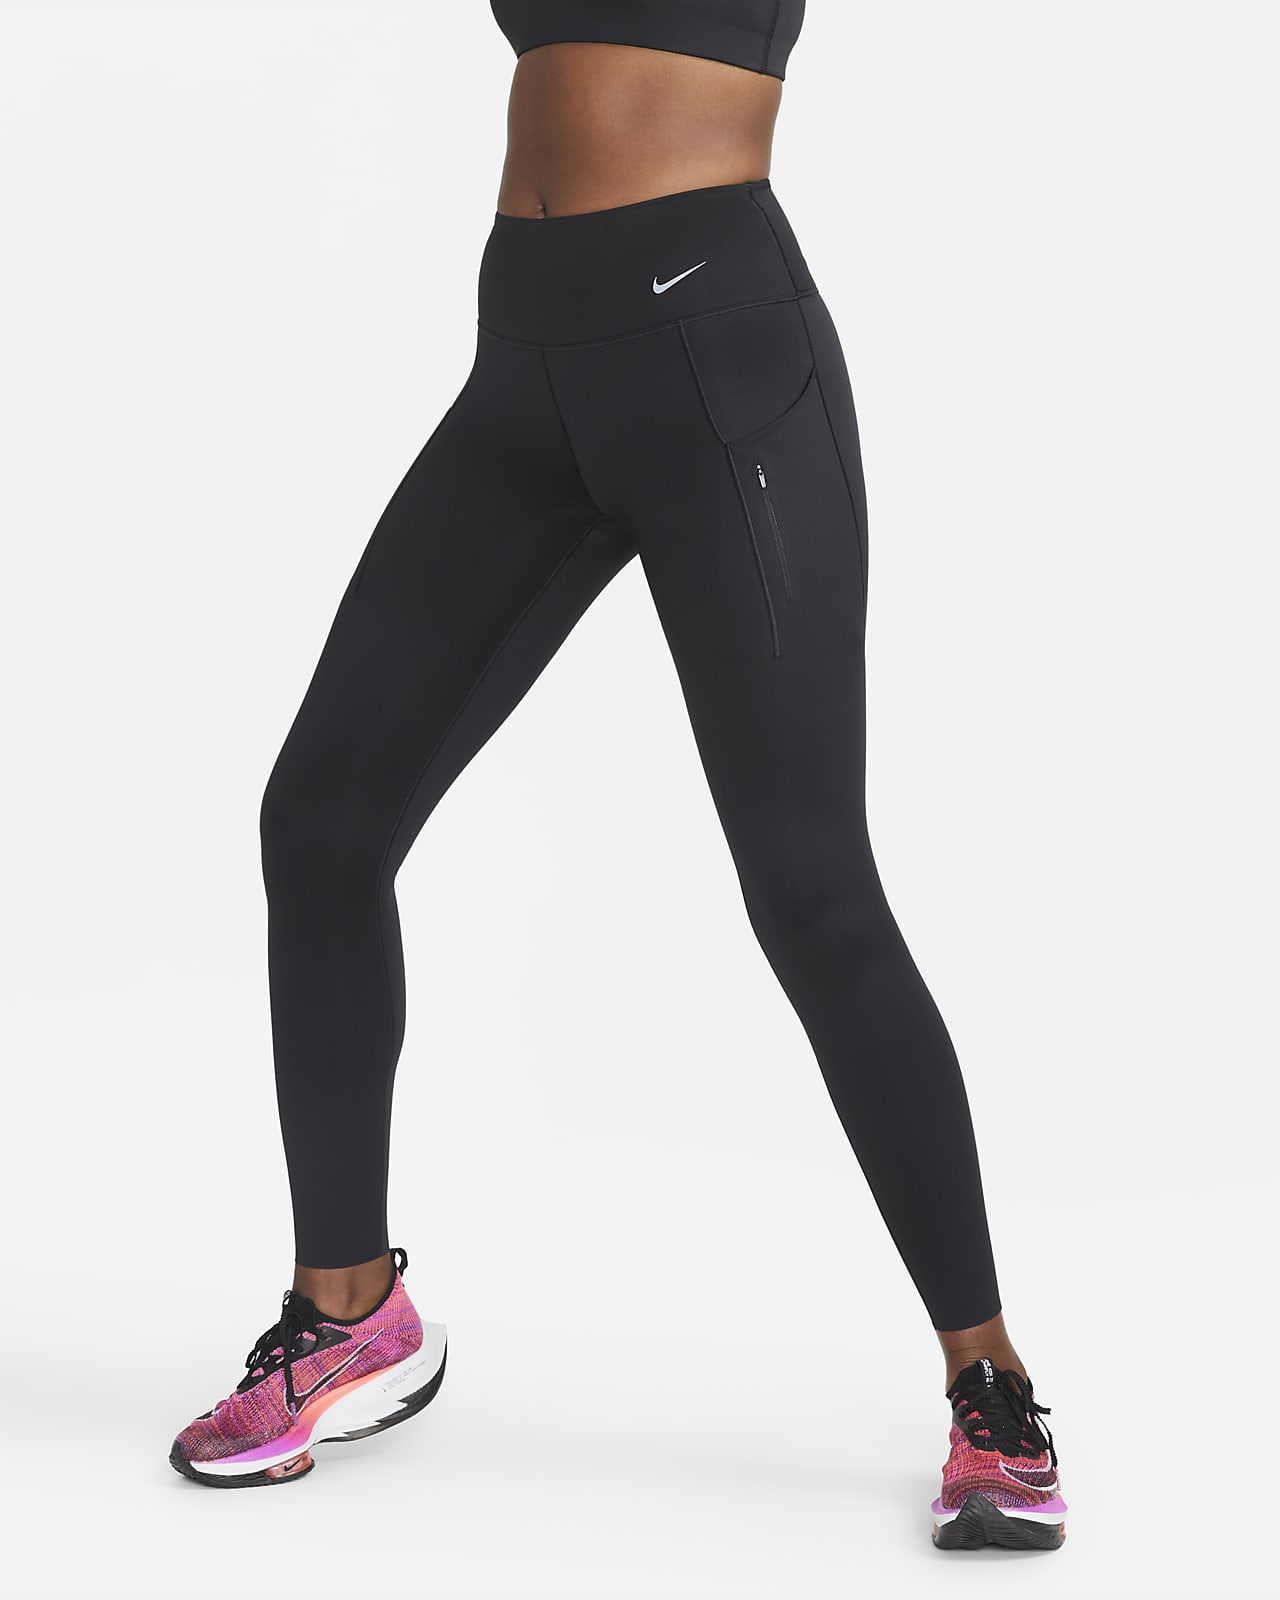 Women's Firm-Support Mid-Rise Full-Length with Nike LU